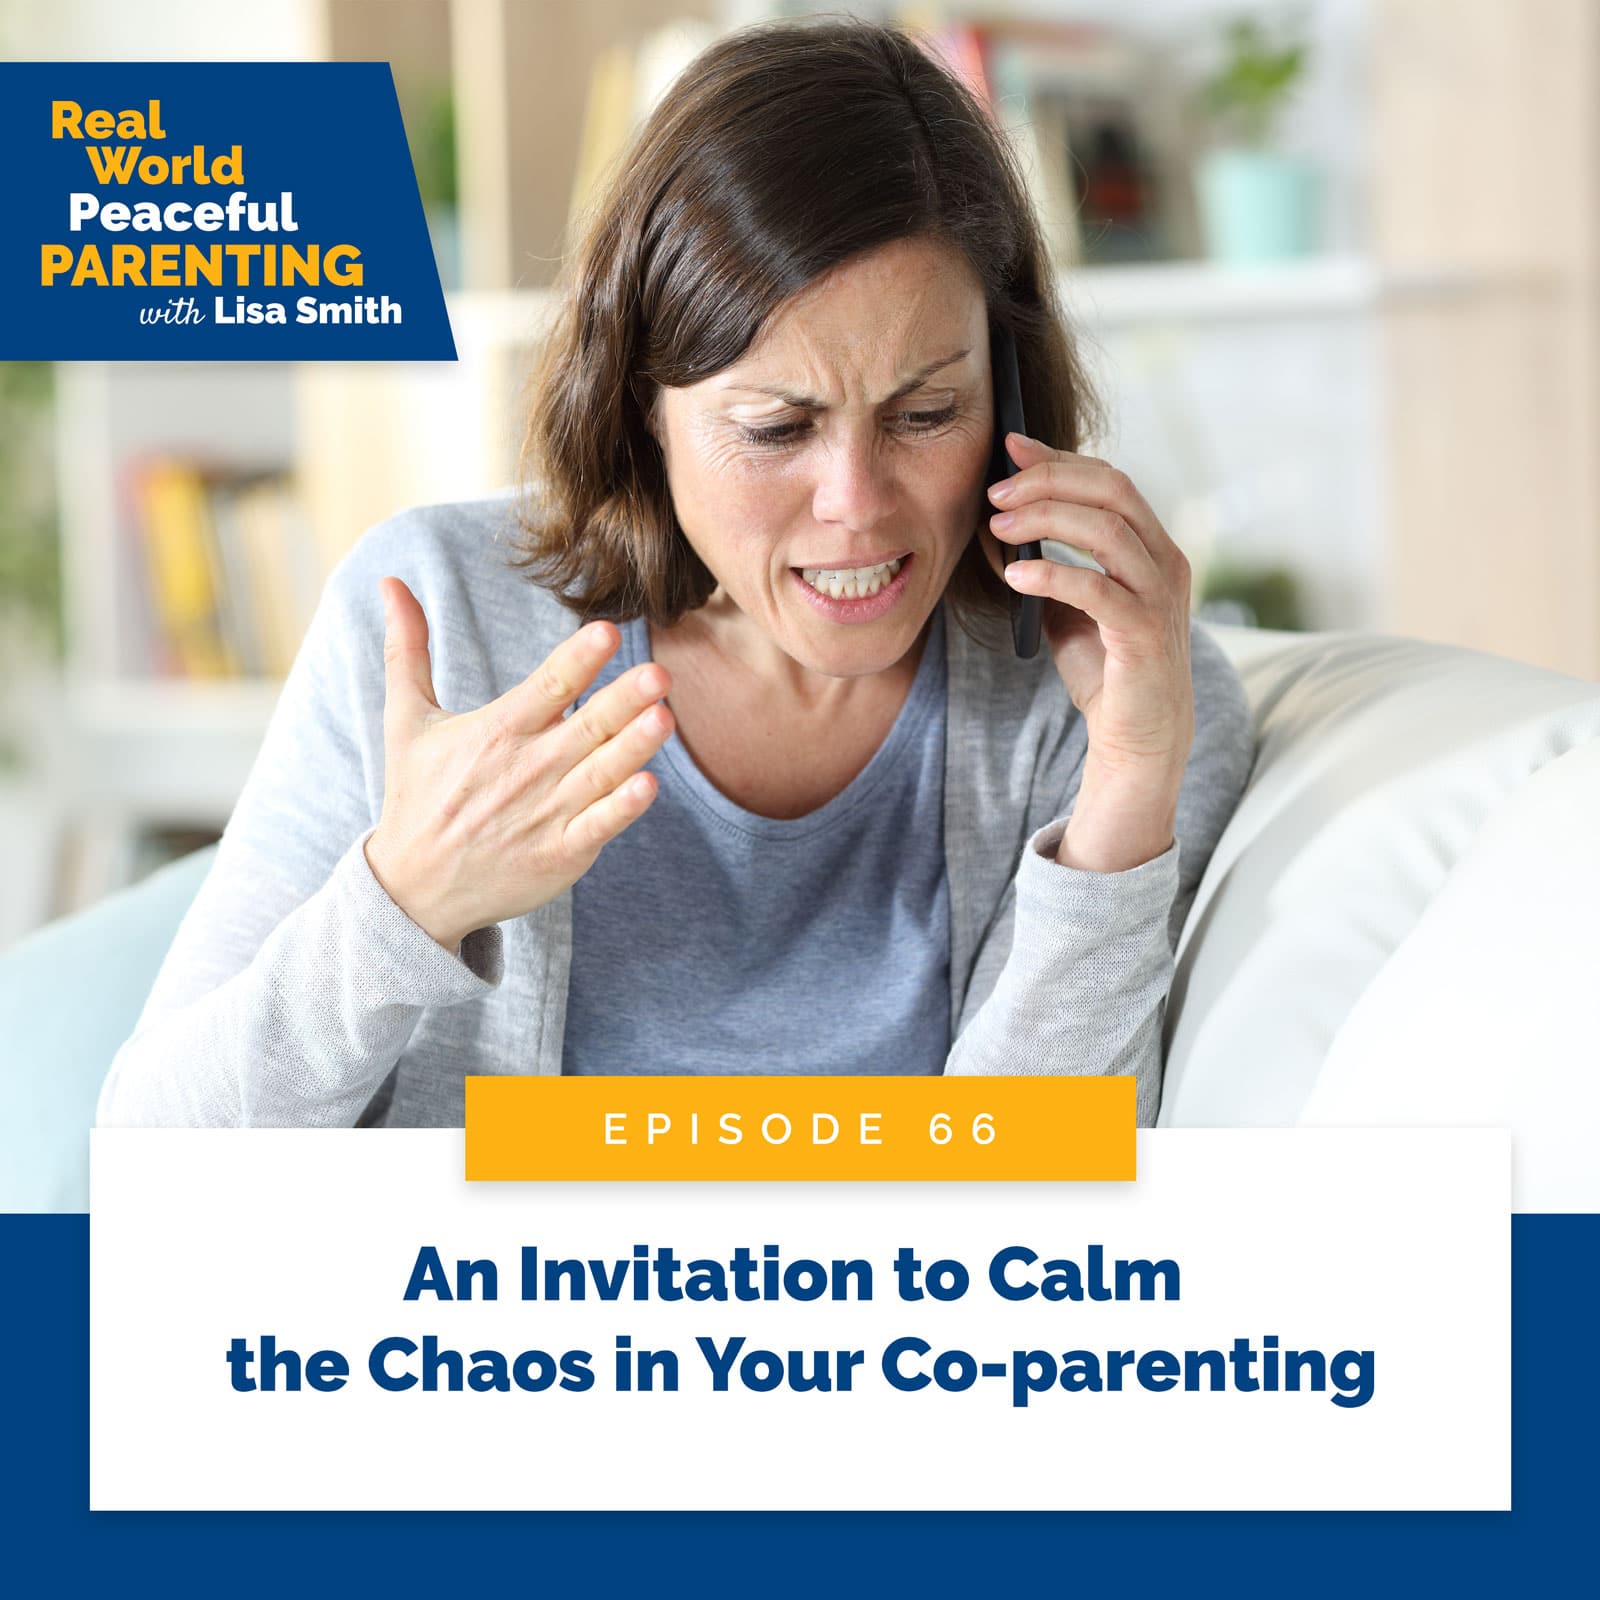 Real World Peaceful Parenting with Lisa Smith | An Invitation to Calm the Chaos in Your Co-parenting